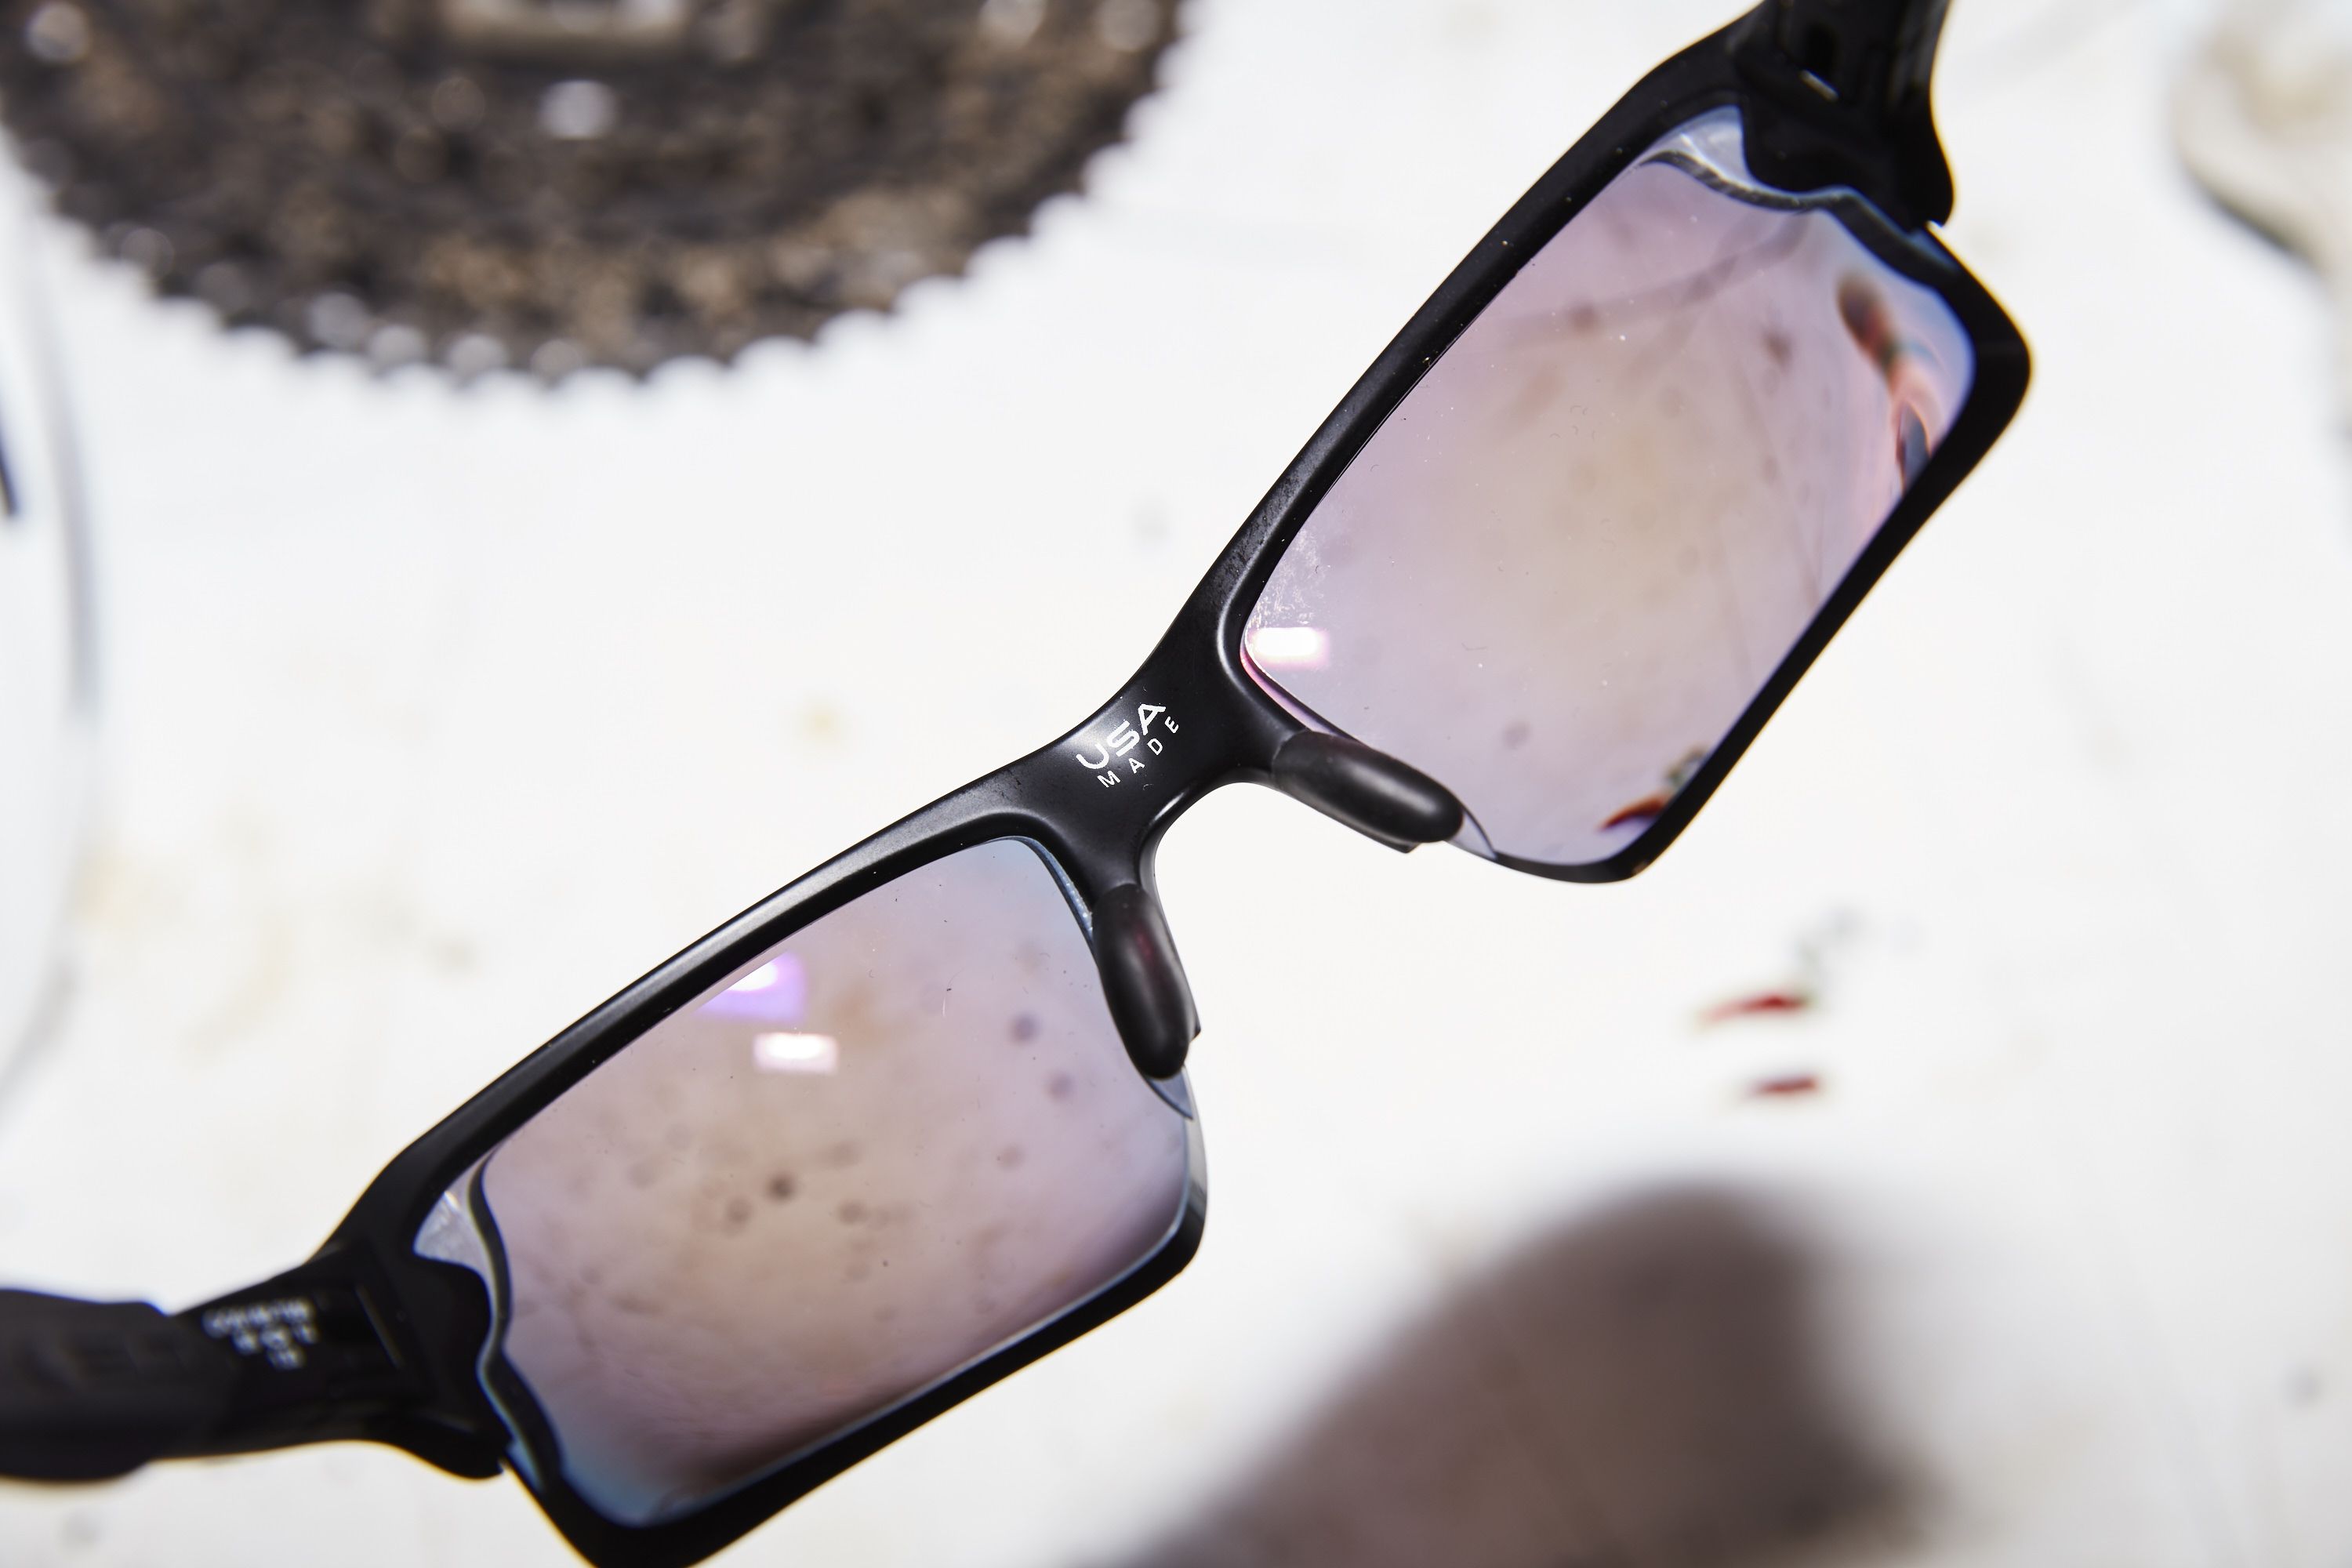 SportRx and Oakley collaborate to make limited-edition Flak 2.0 XL